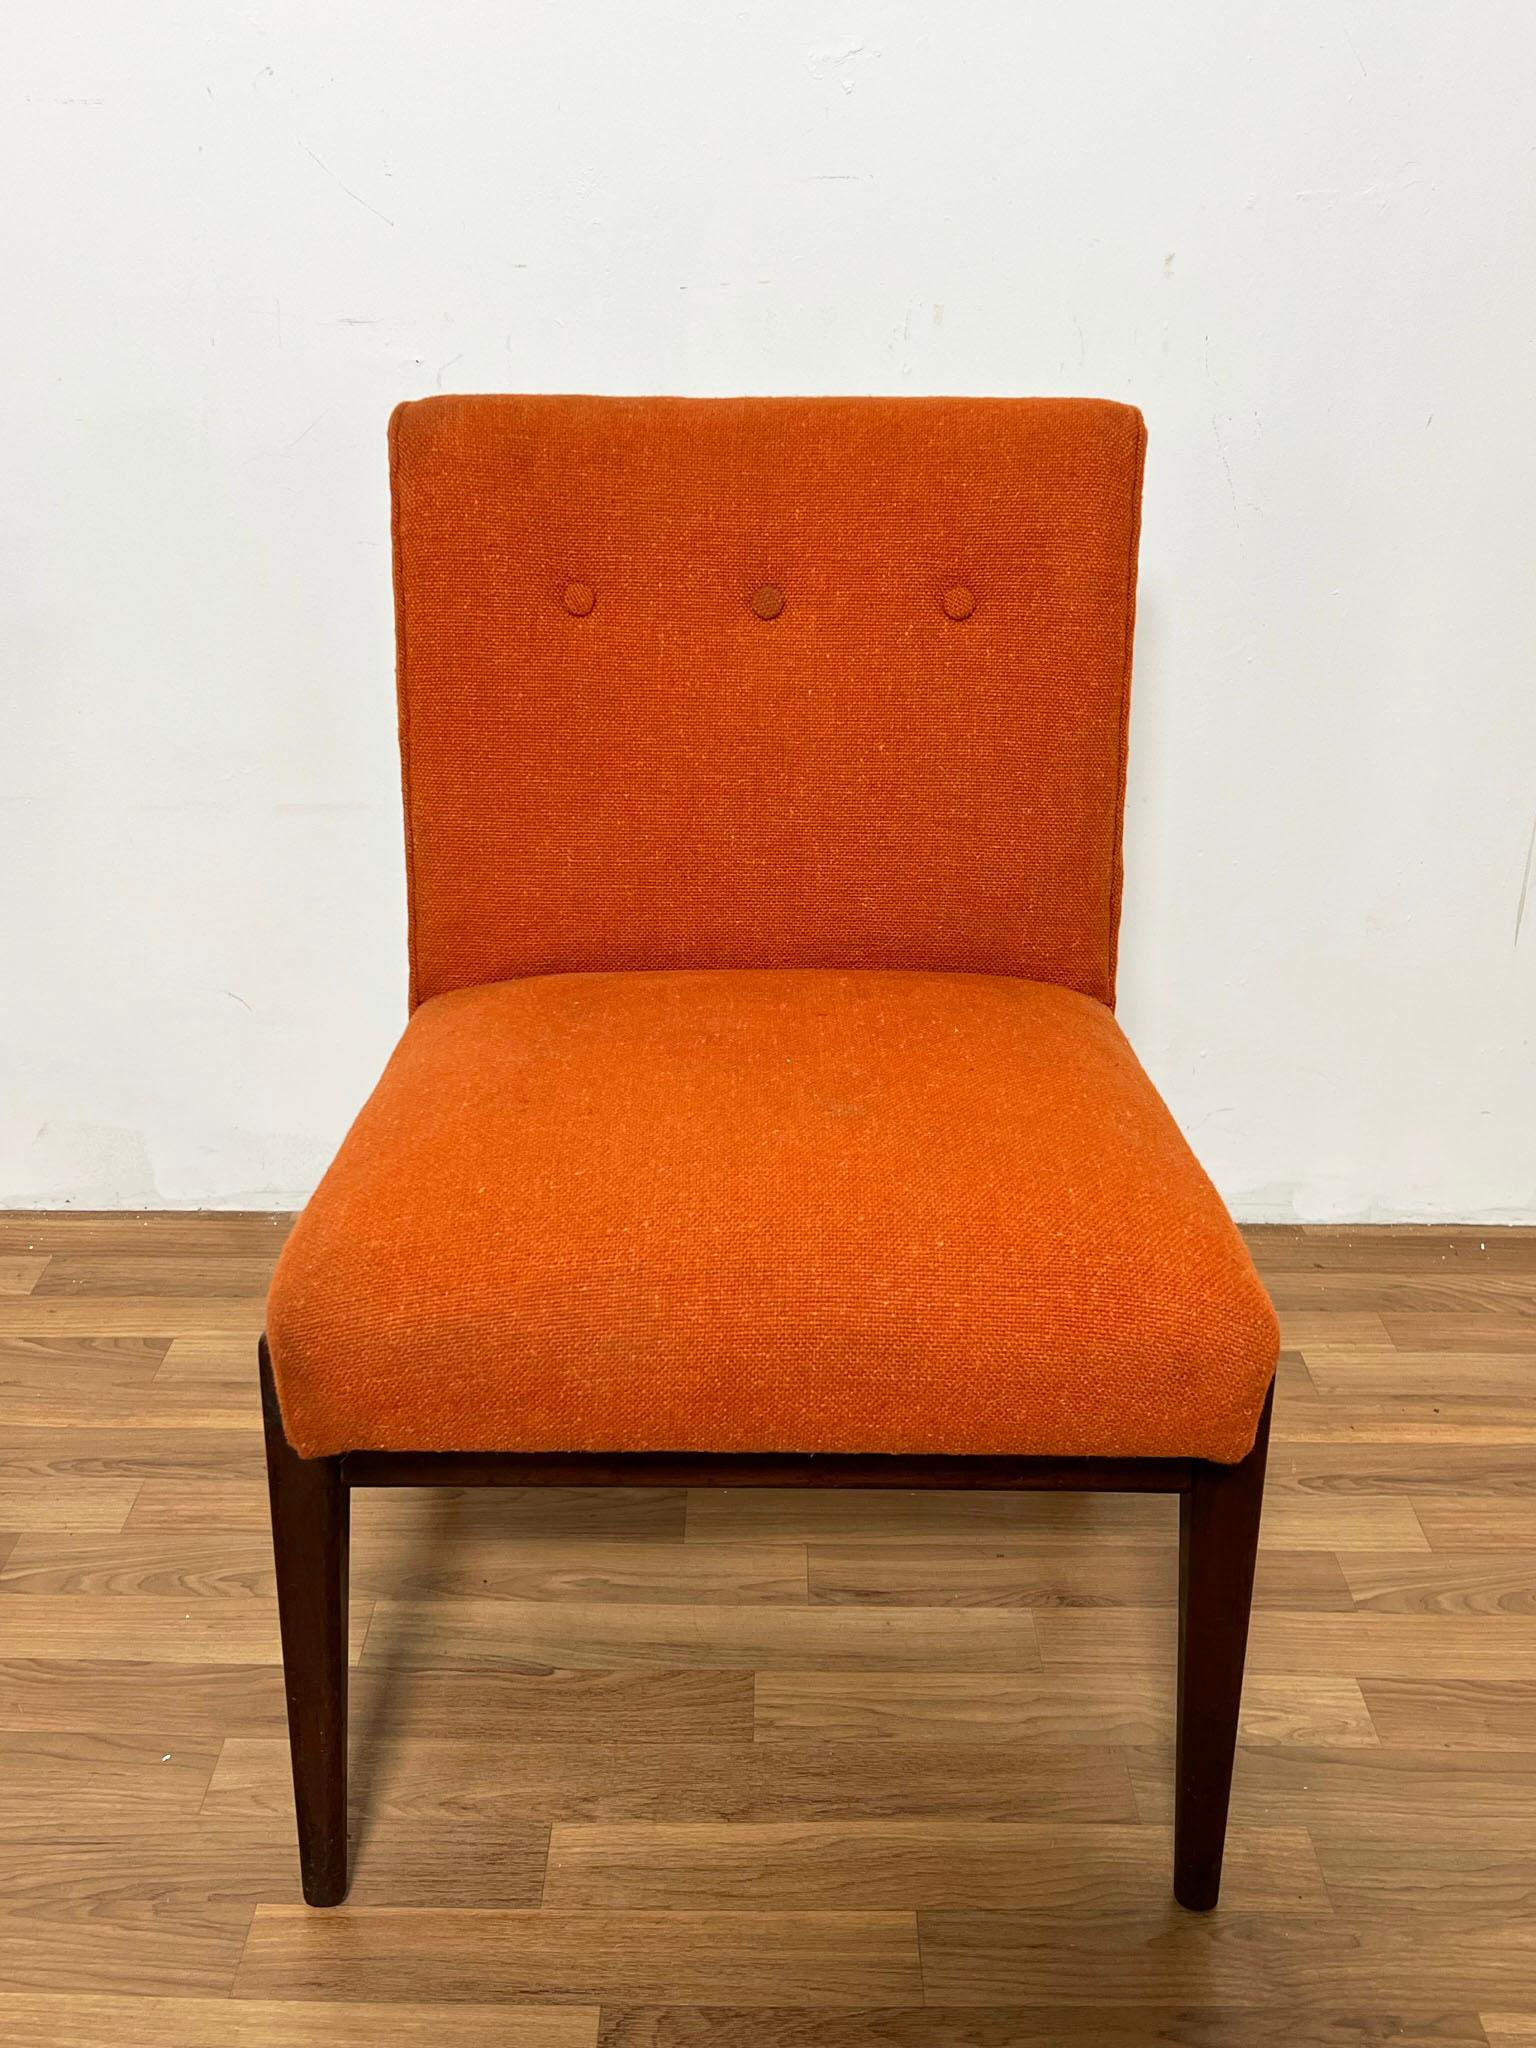 Upholstery Pair of Jens Risom C-220 Lounge Chairs Circa 1950s For Sale